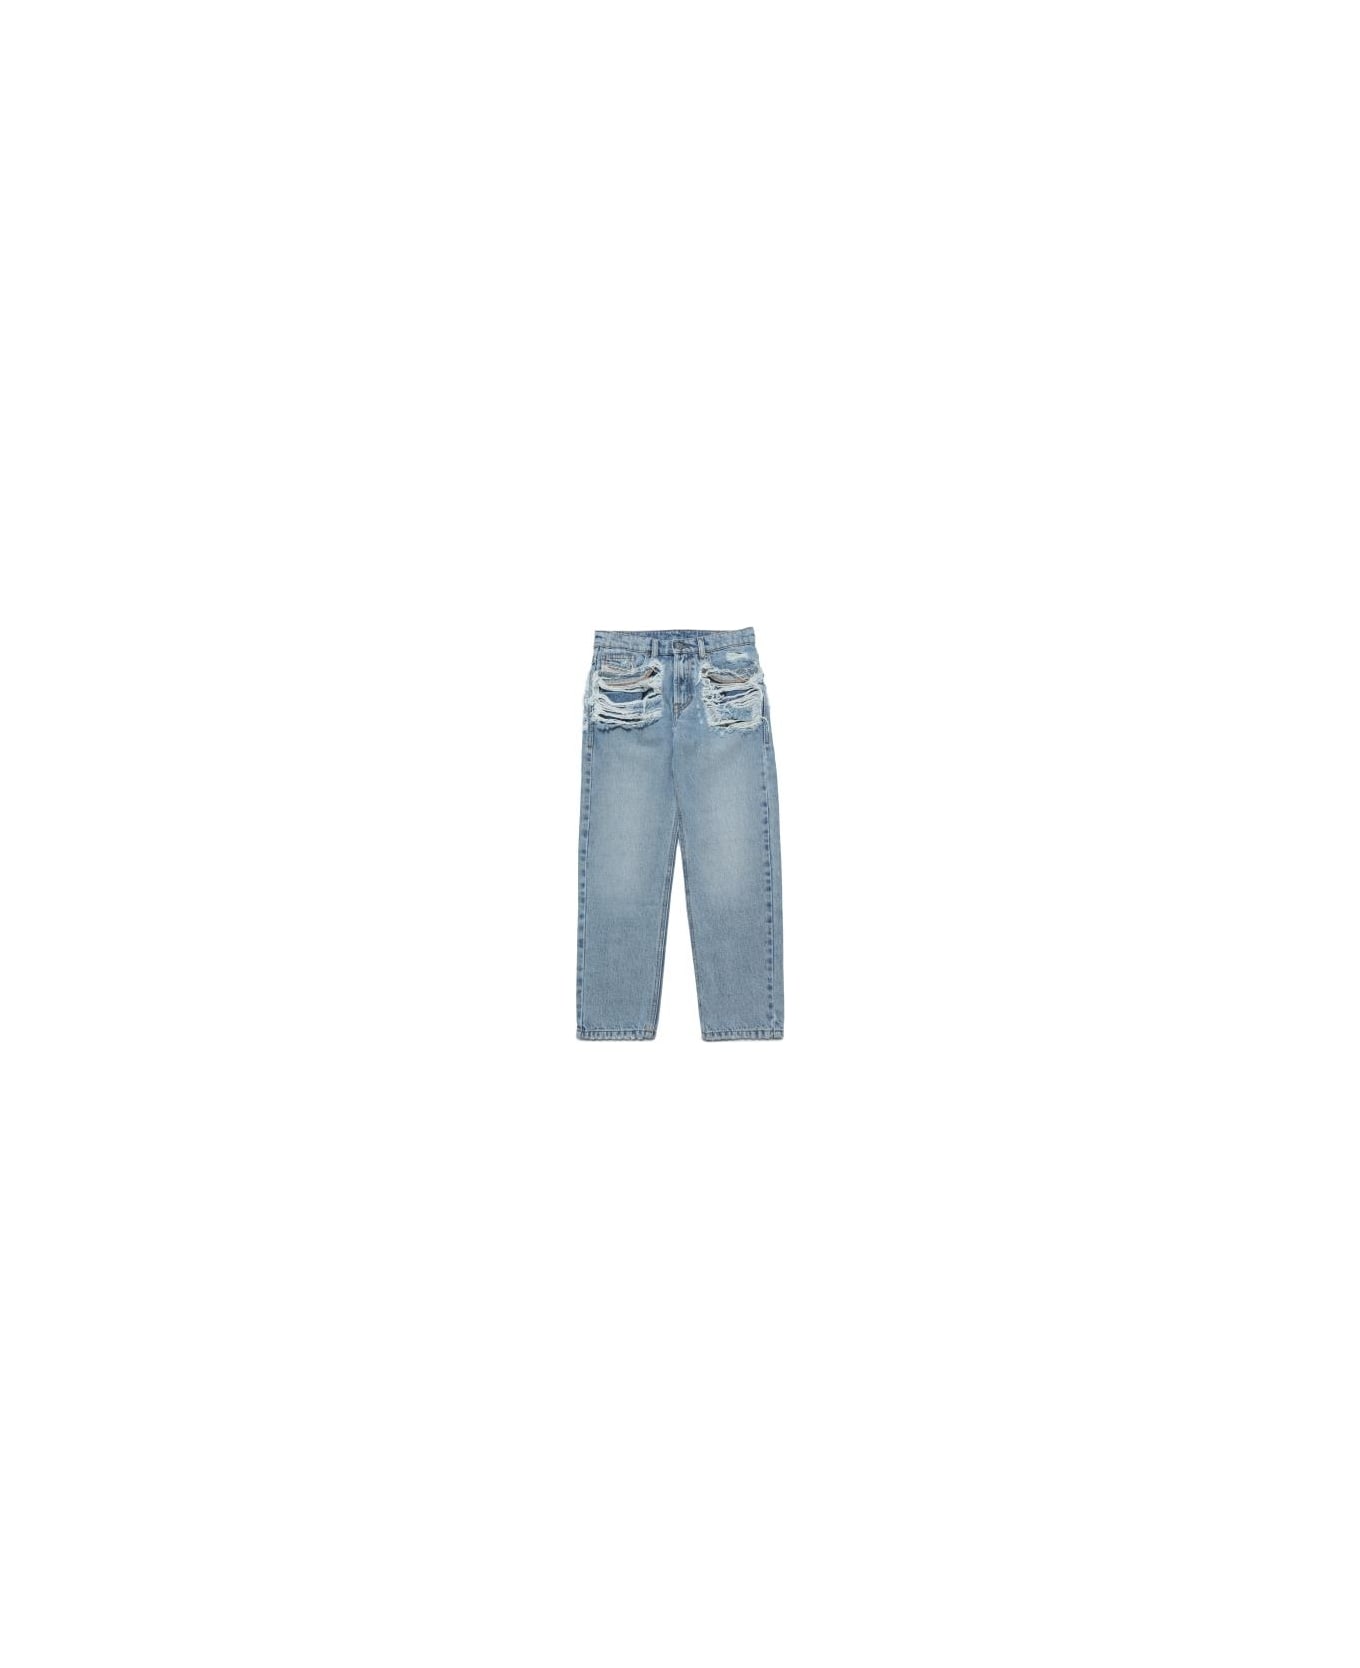 Diesel Jeans With Tears - Blue ボトムス